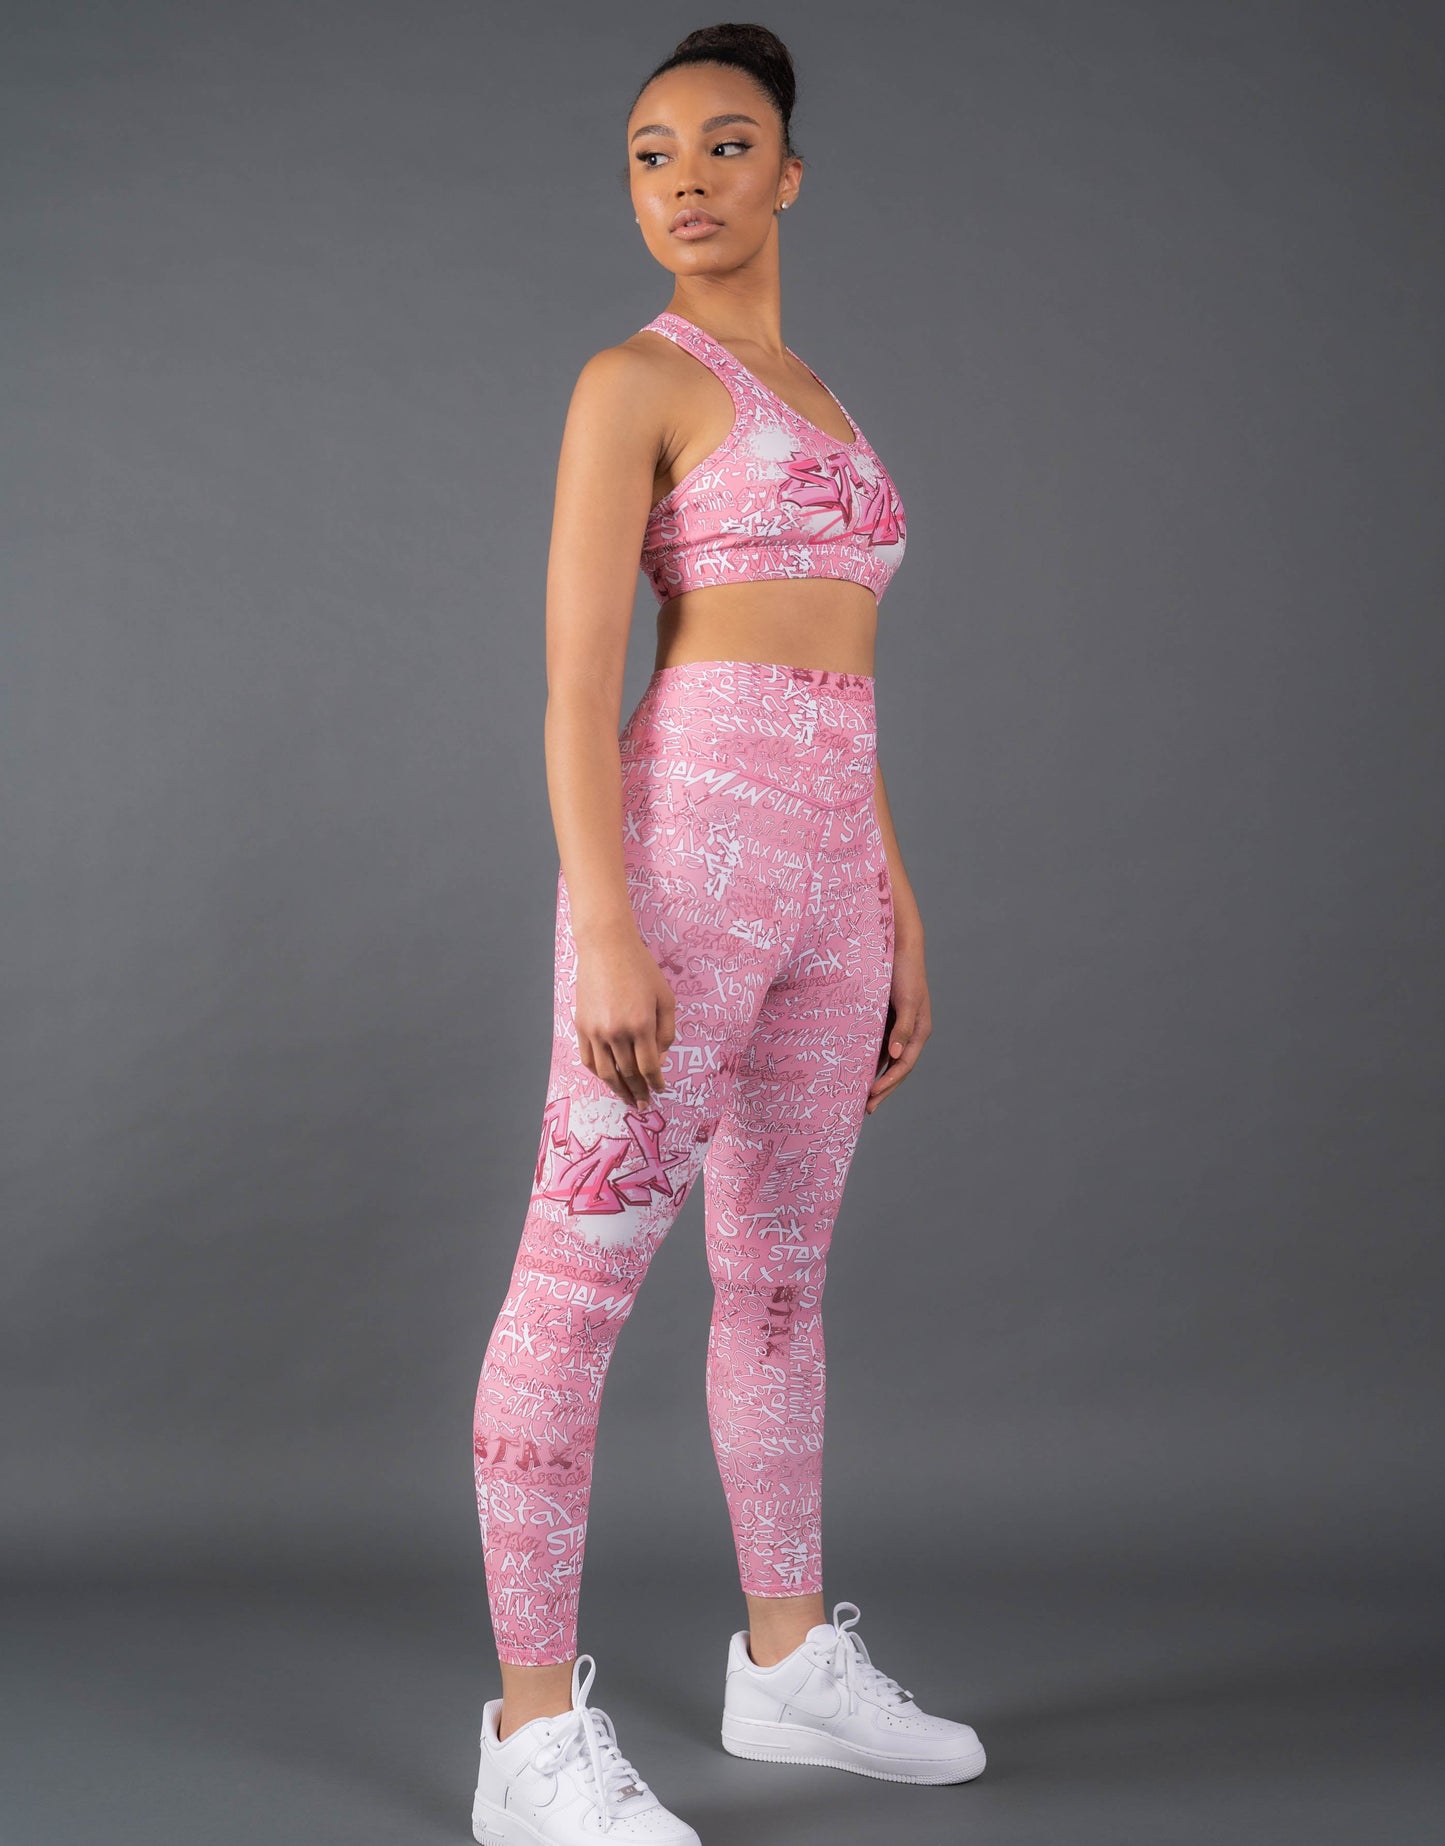 STAX. Graffiti Tights Full Length - Pink and White